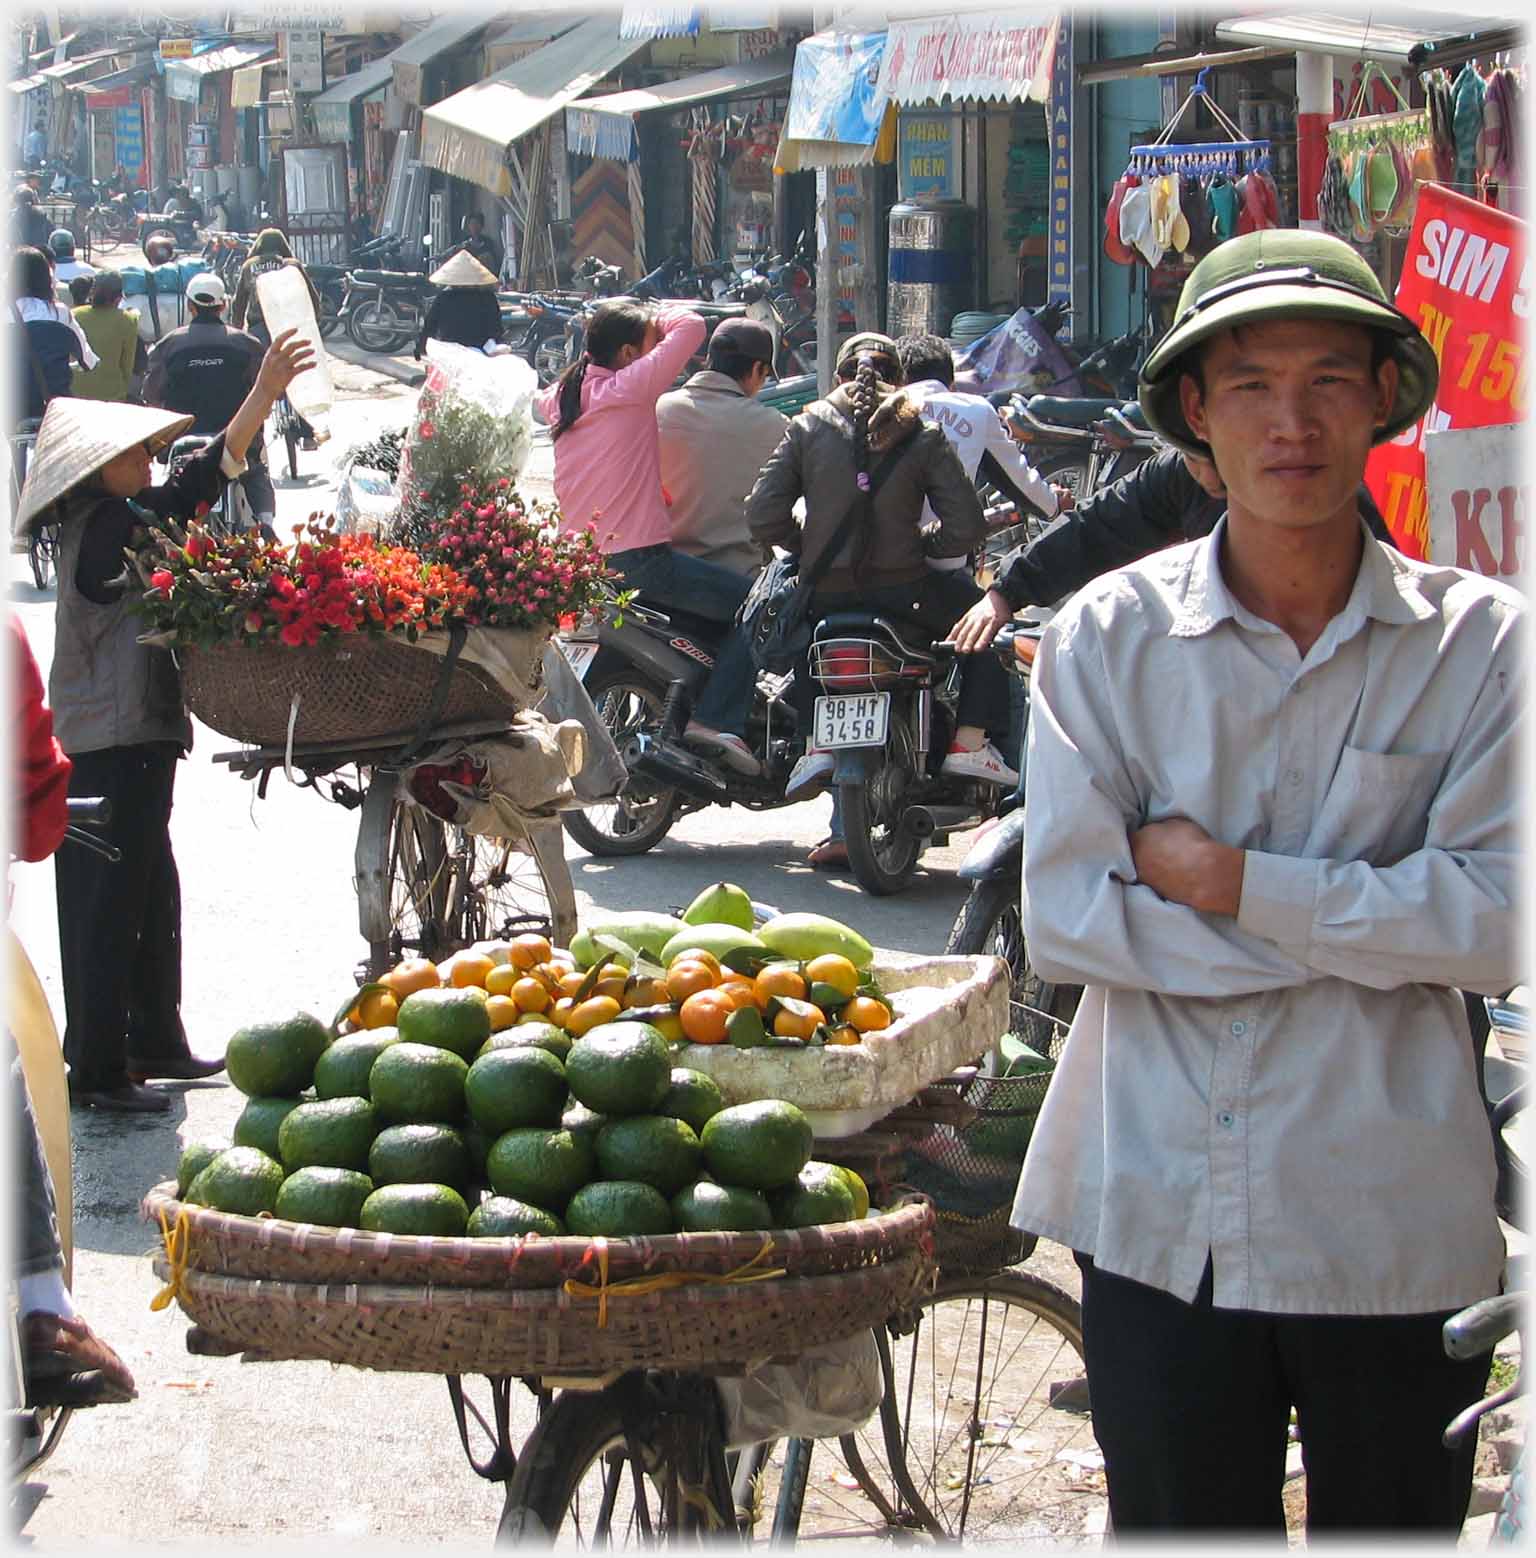 Man standing square on looking at camera beside fruit on bike.